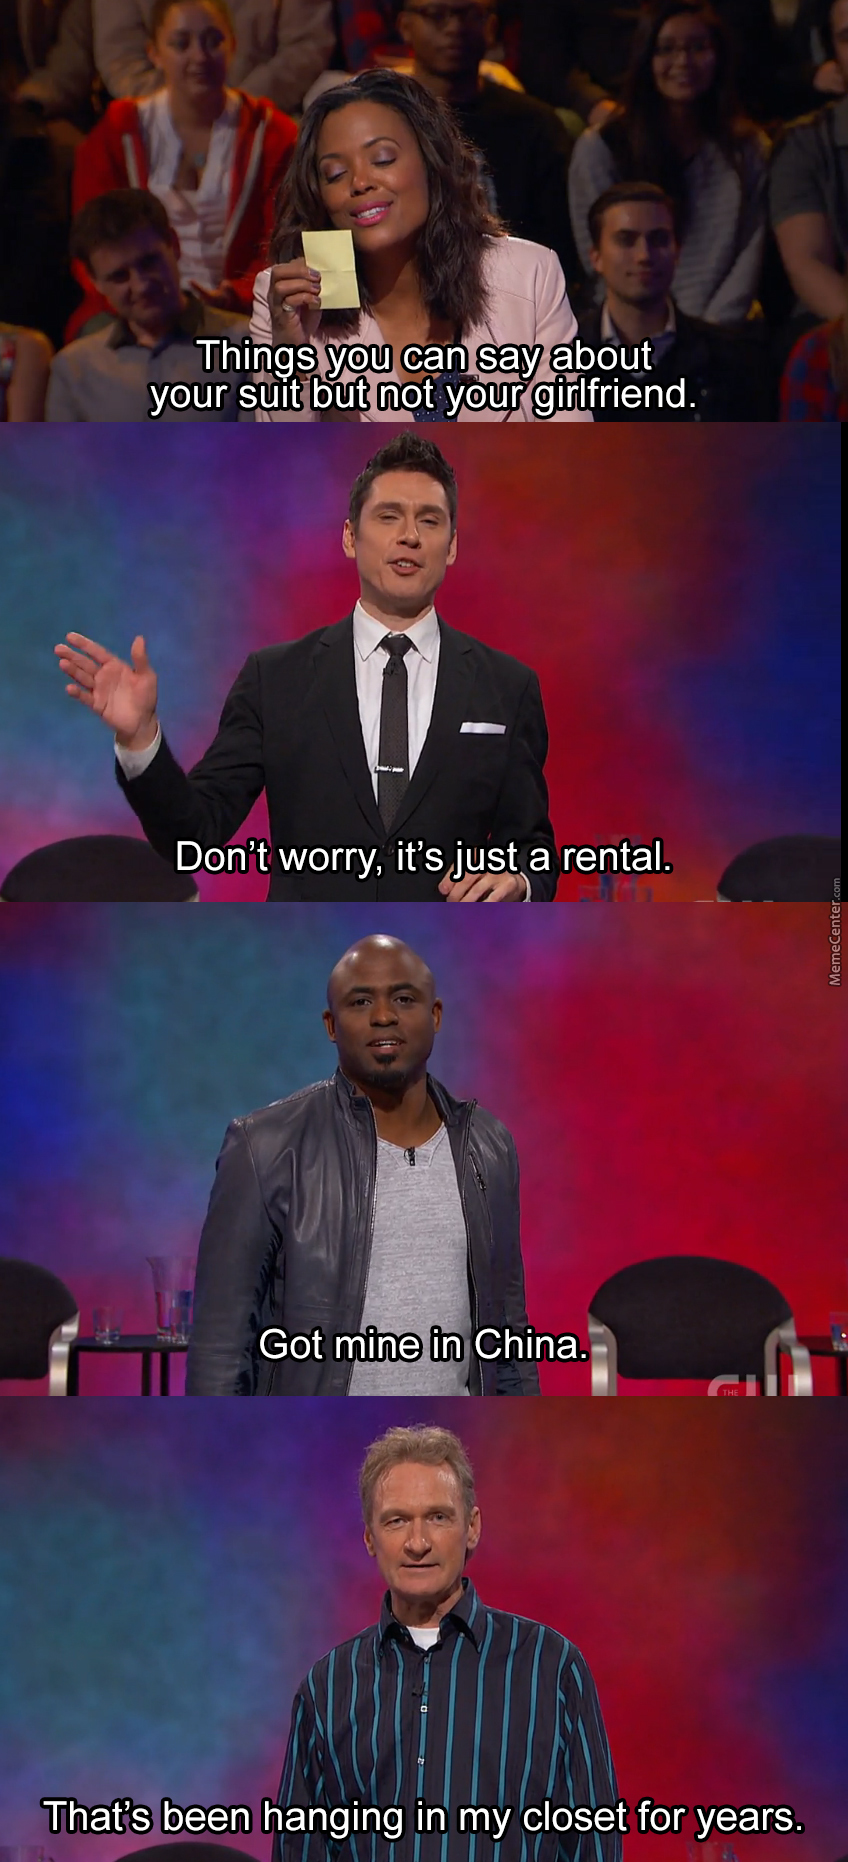 memes - whose line is it anyway best moments - Things you can say about your suit but not your girlfriend. Don't worry, it's just a rental Got mine in China. That's been hanging in my closet for years.